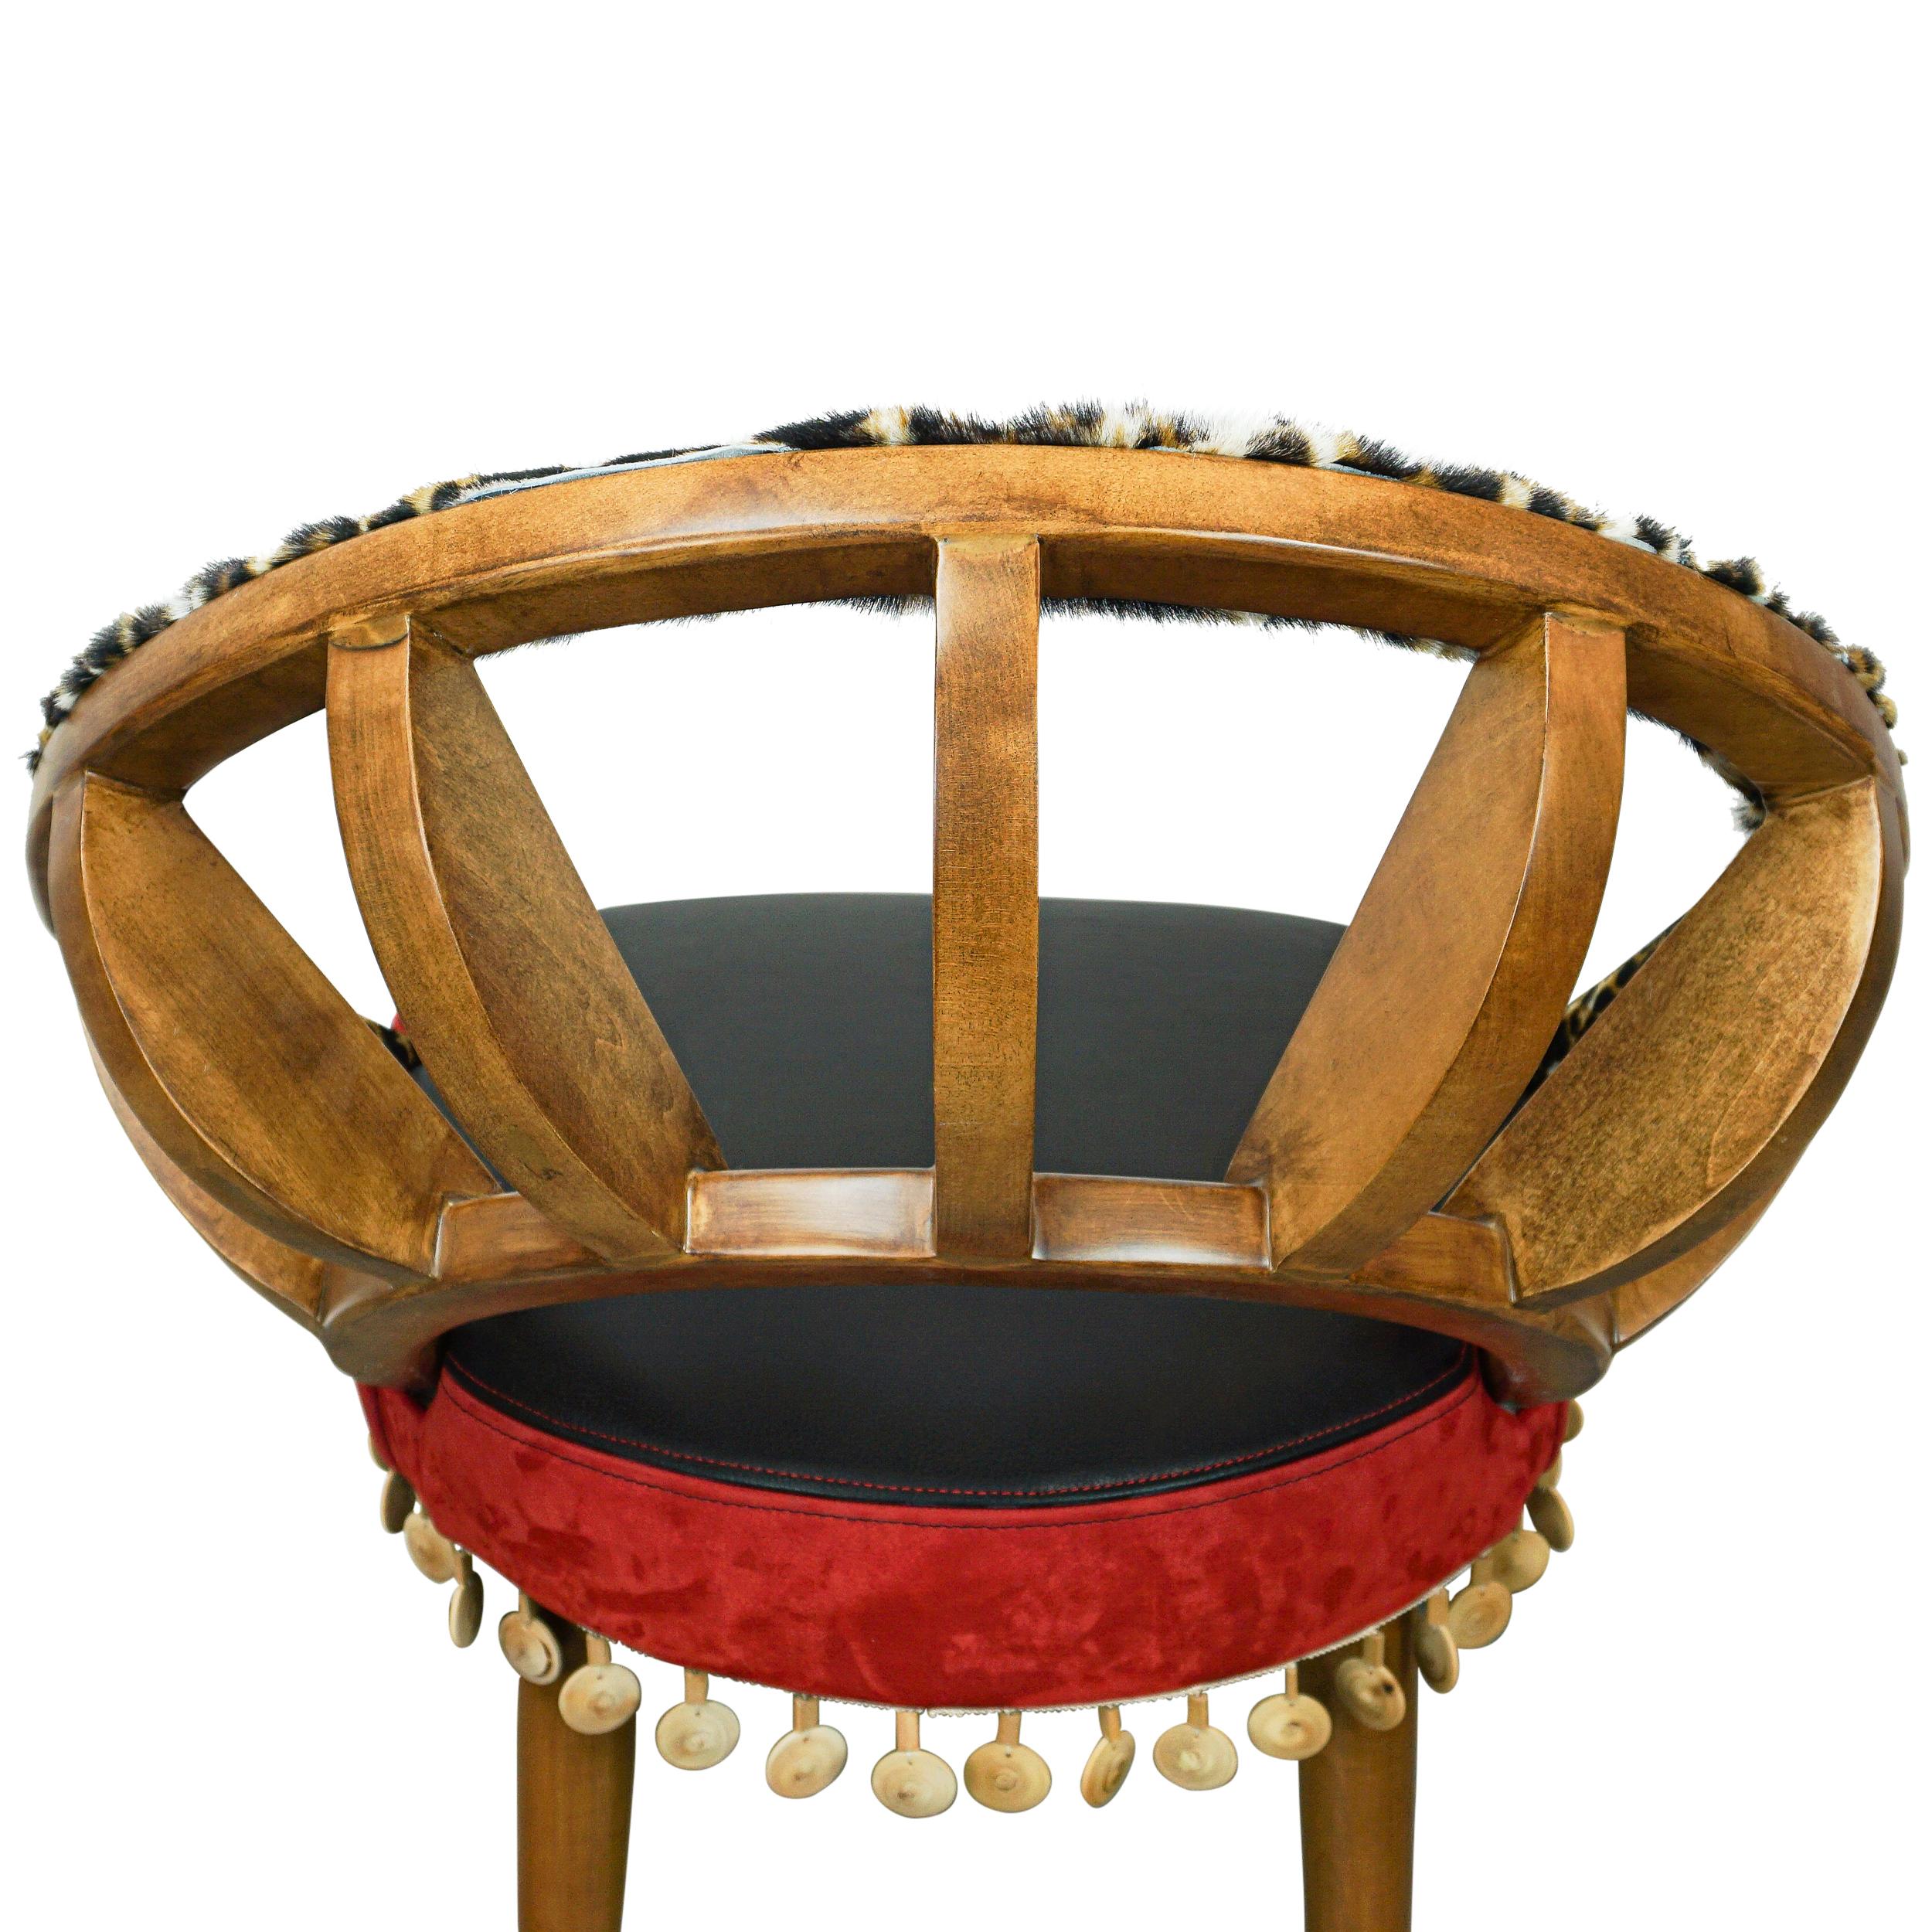 Ribbed Wood Chair with Cheetah Hair on Hide, Red + Black Leather and Wood Bead For Sale 9